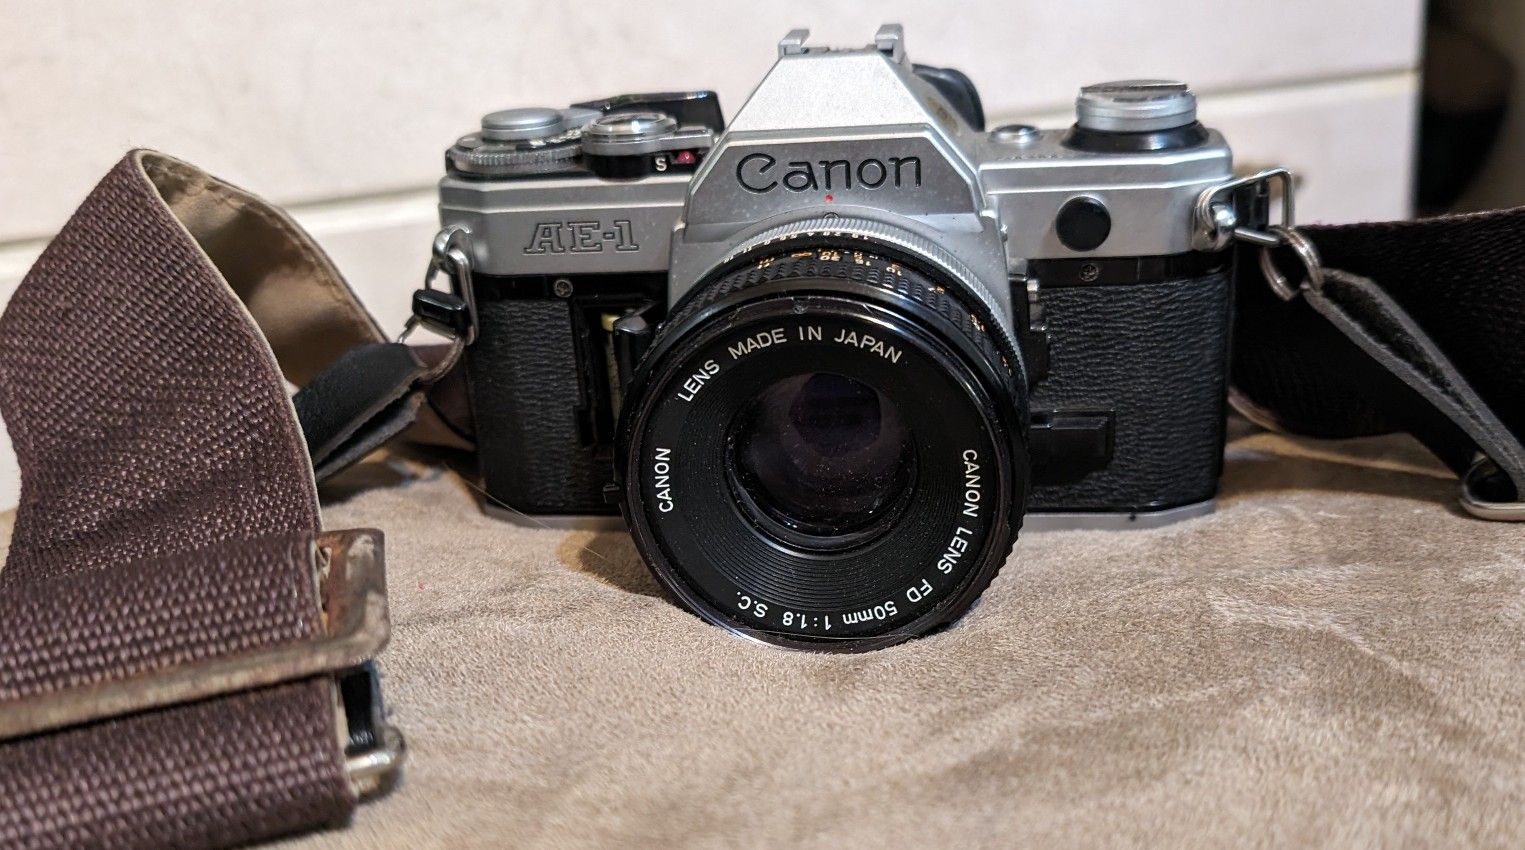 Vintage Camera Cannon AE1 50mm In Excellent Condition $175 Obo